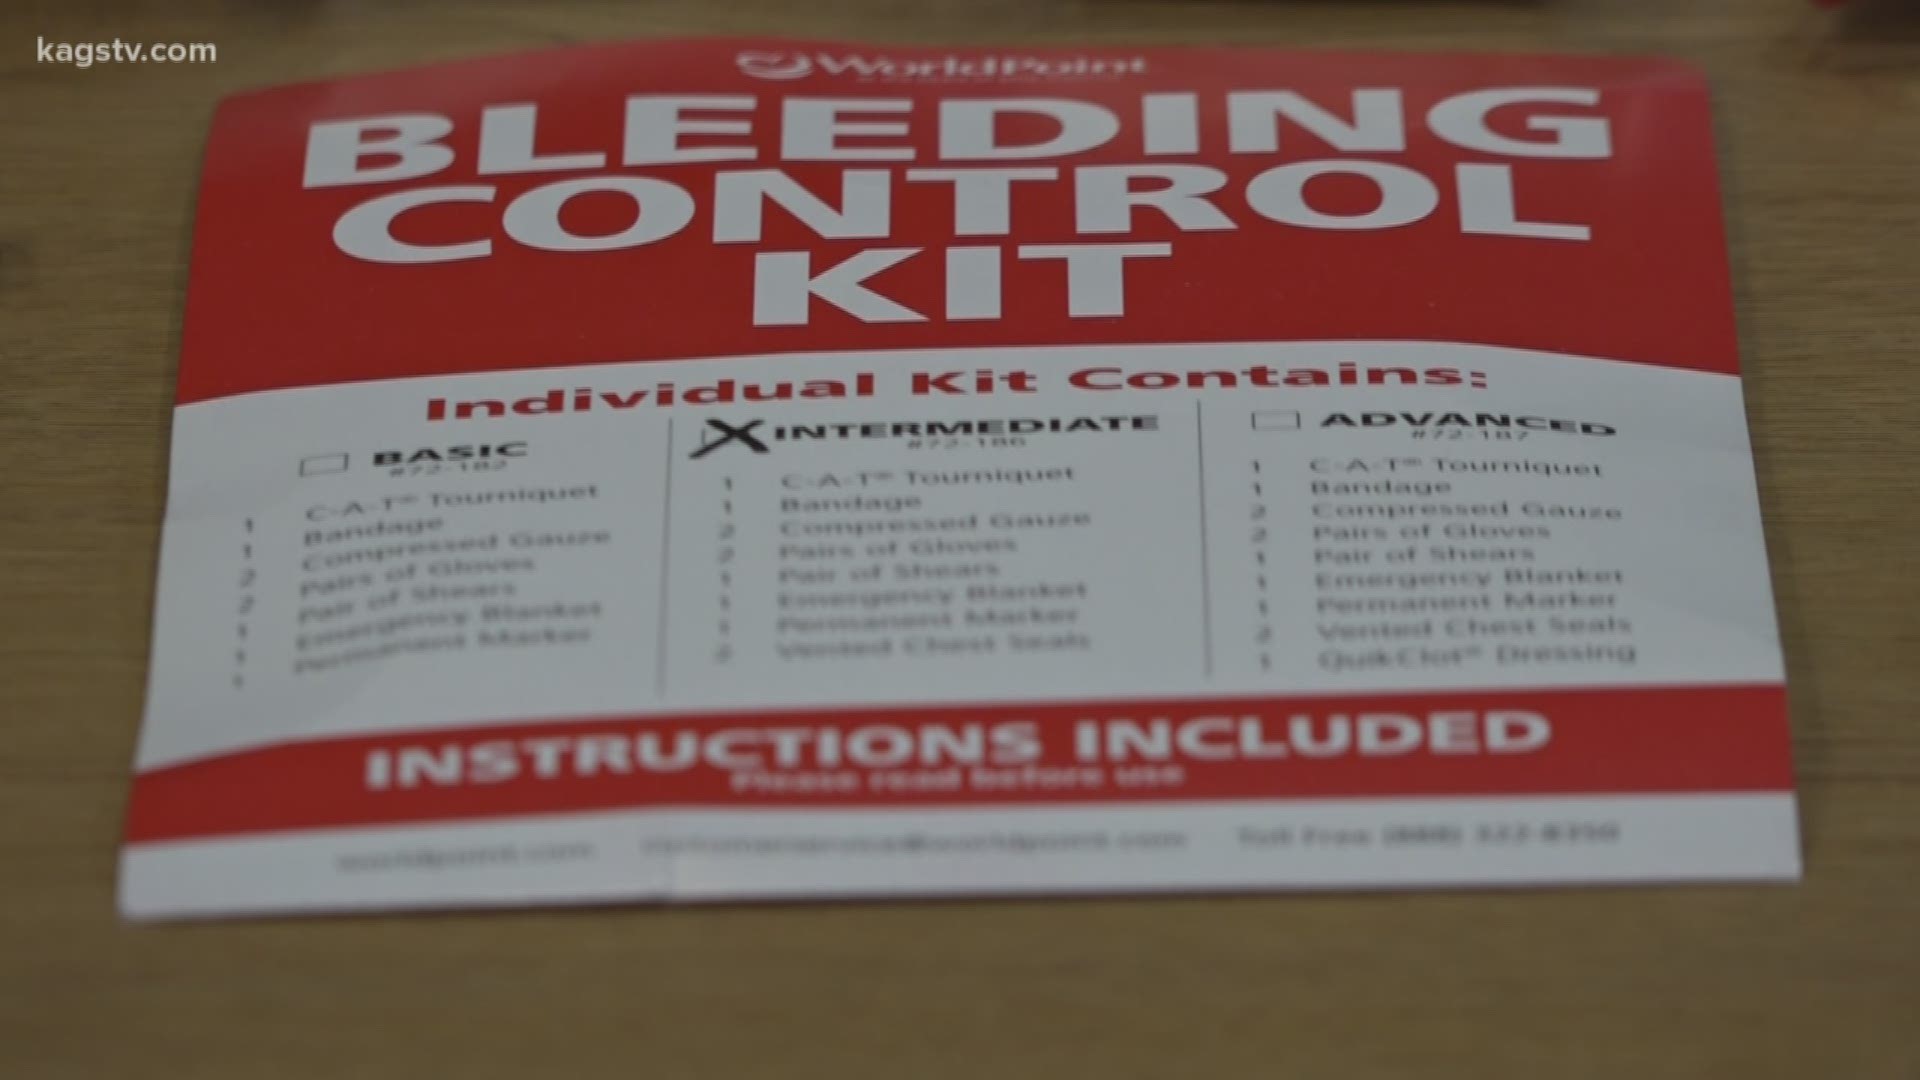 Texas state law requires all public schools to have bleeding control kits by Jan. 1, 2020.